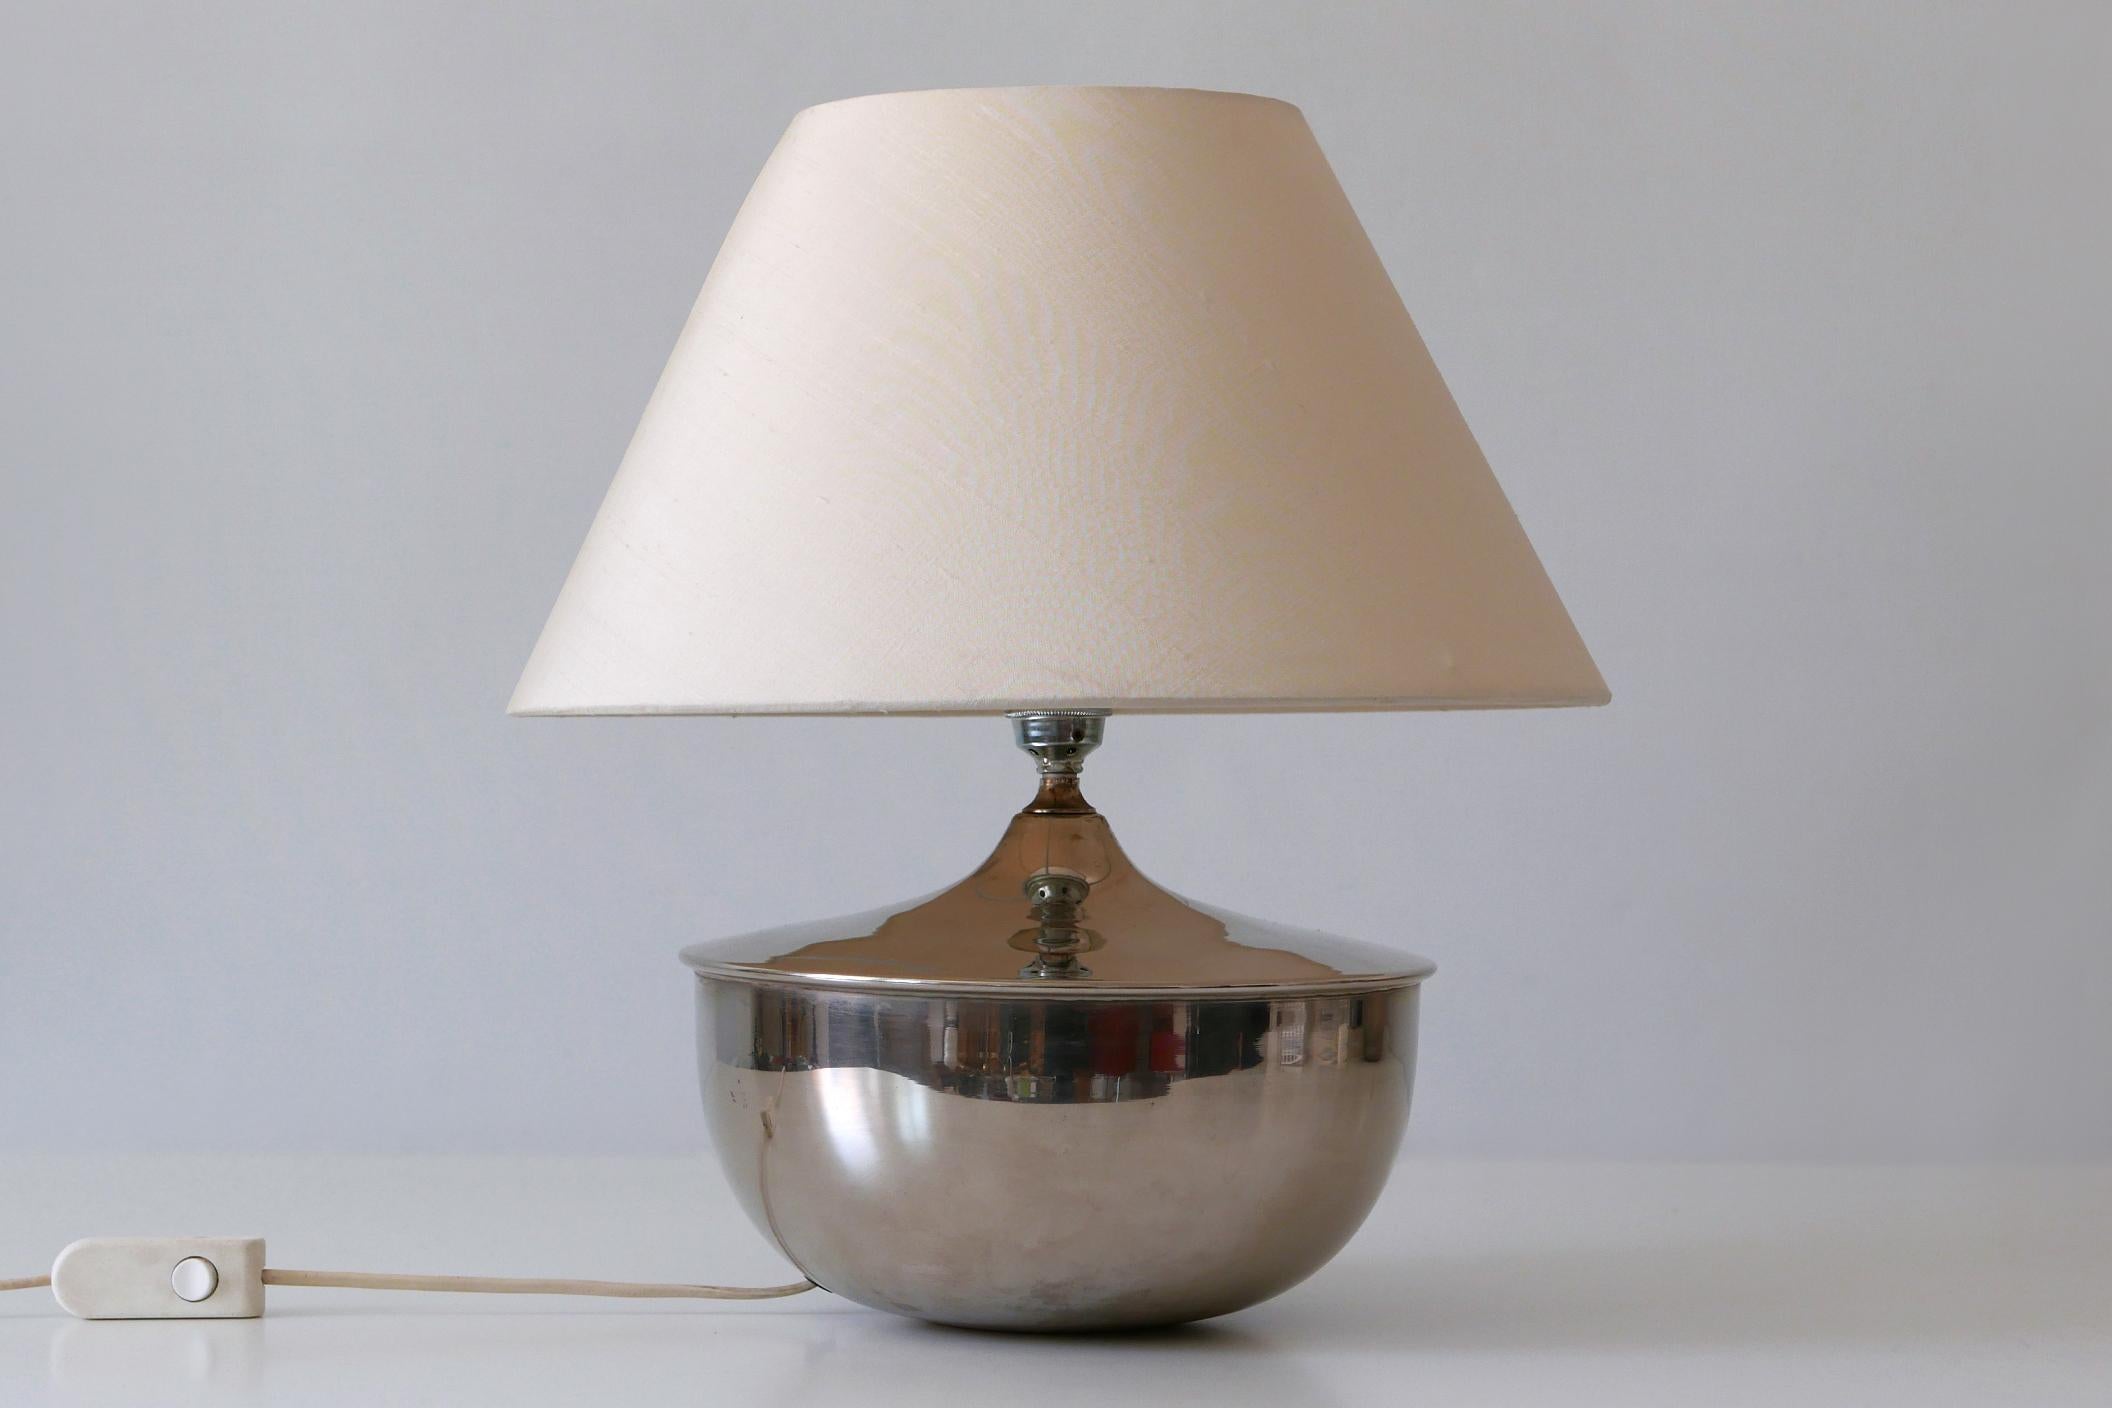 Set of Two Elegant Mid-Century Modern Table Lamps 1970s Germany 8